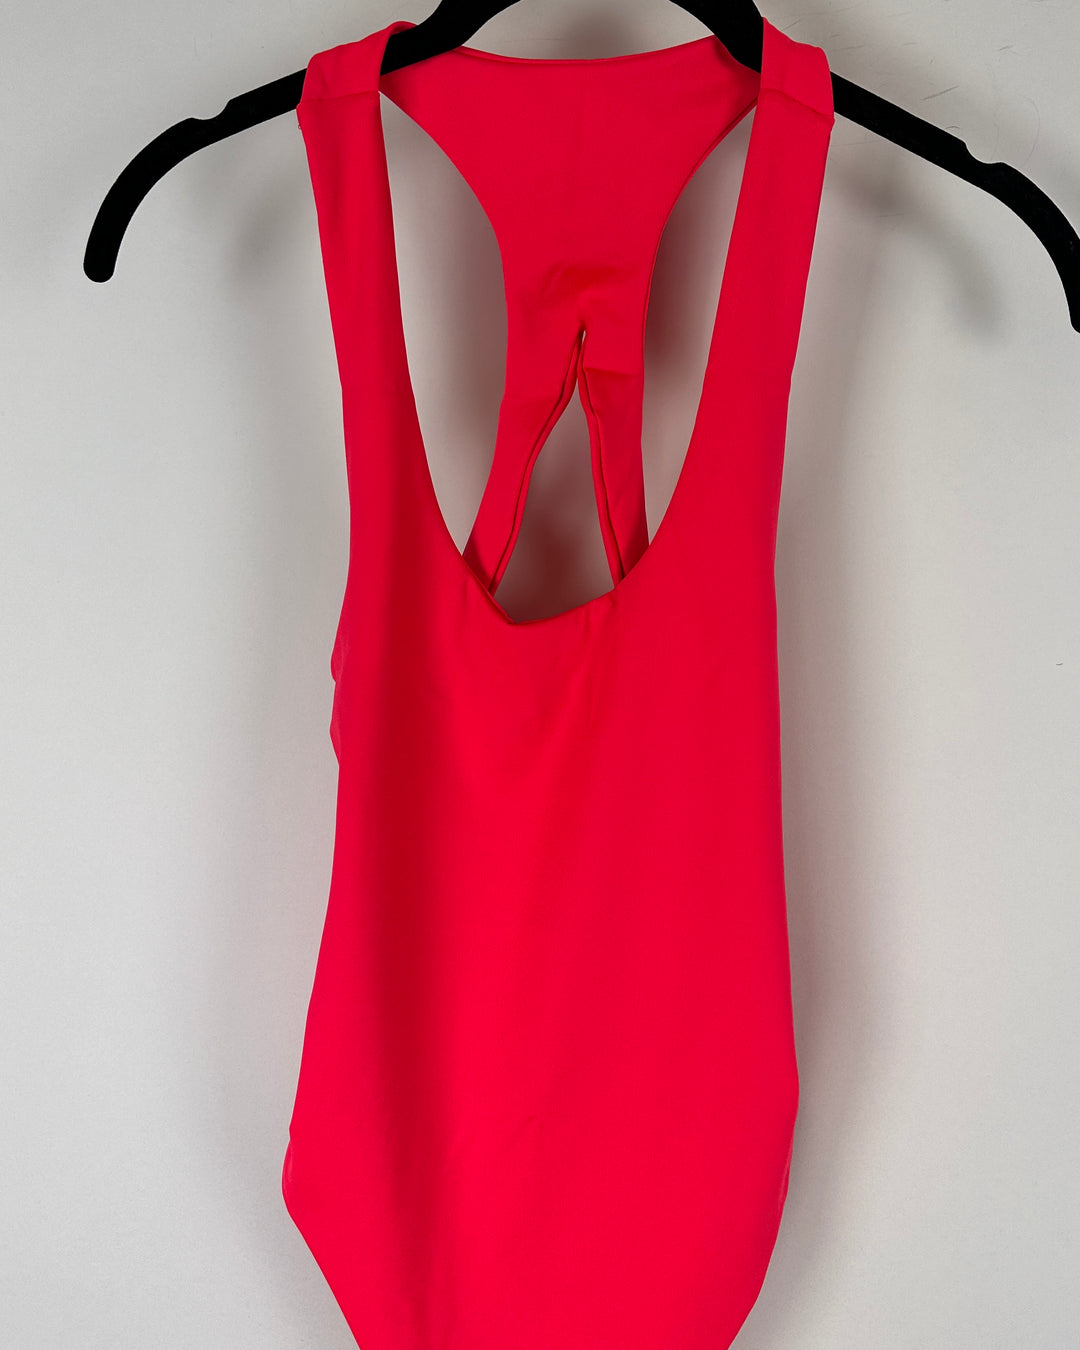 Pink One Piece Swimsuit - Small